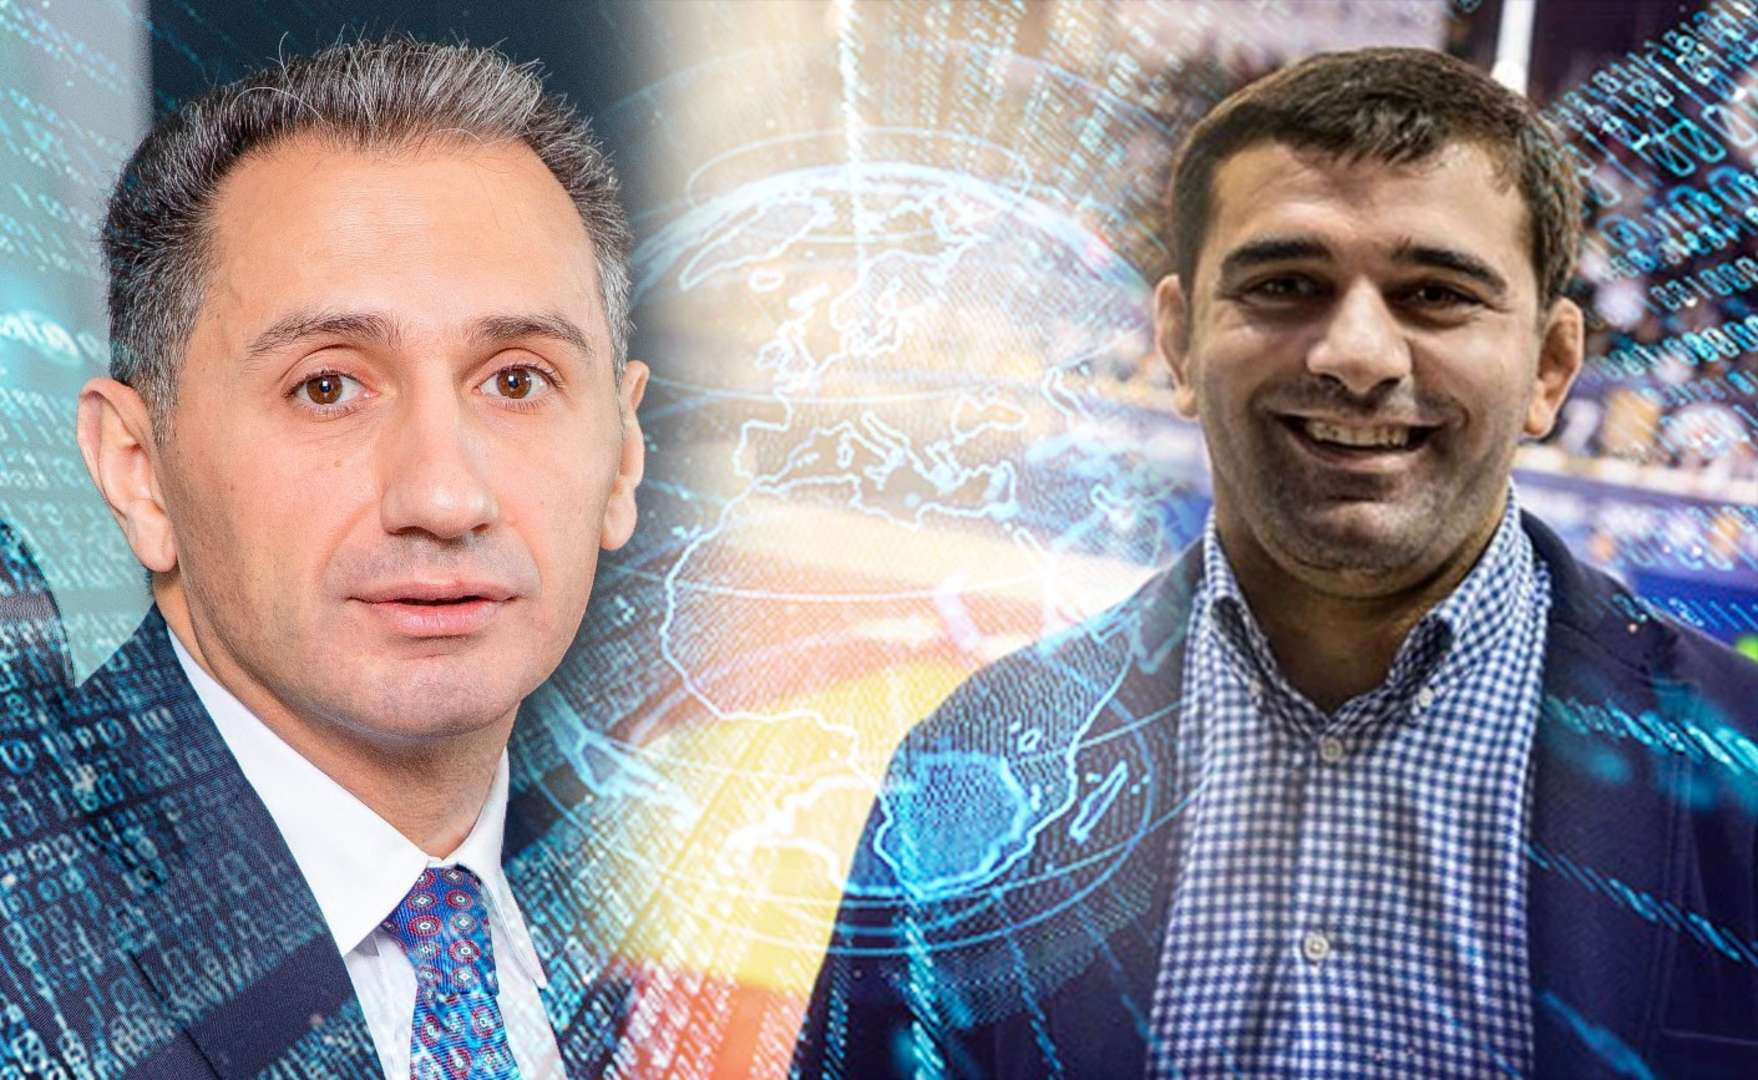 Azerbaijani Government official to lead IJF New Technologies and High Performance Commission